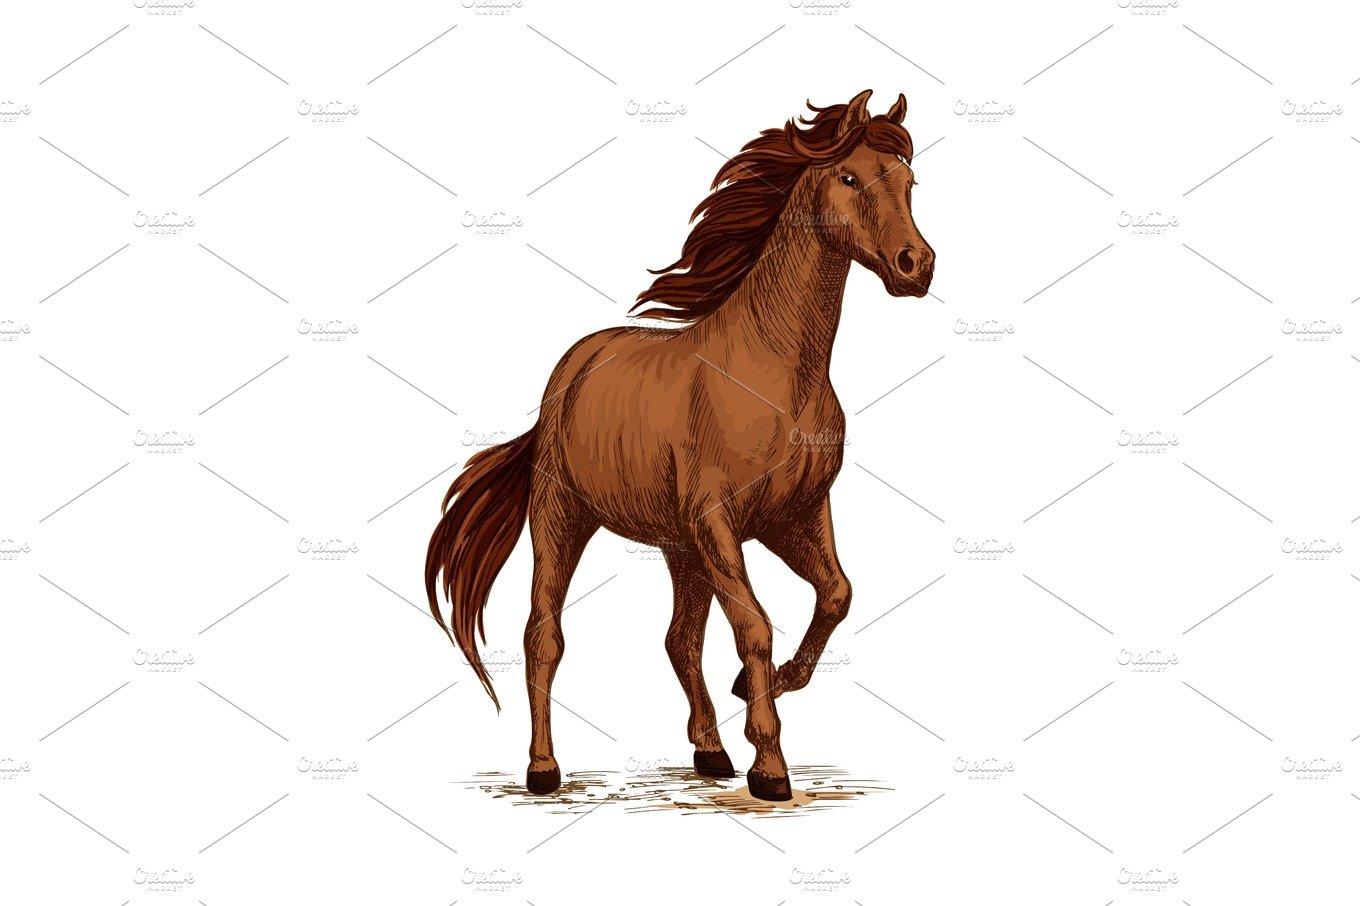 Drawing Sketch Running Horse Outline Editable Illustration Stock Vector by  ©manjunaths88@gmail.com 558152540